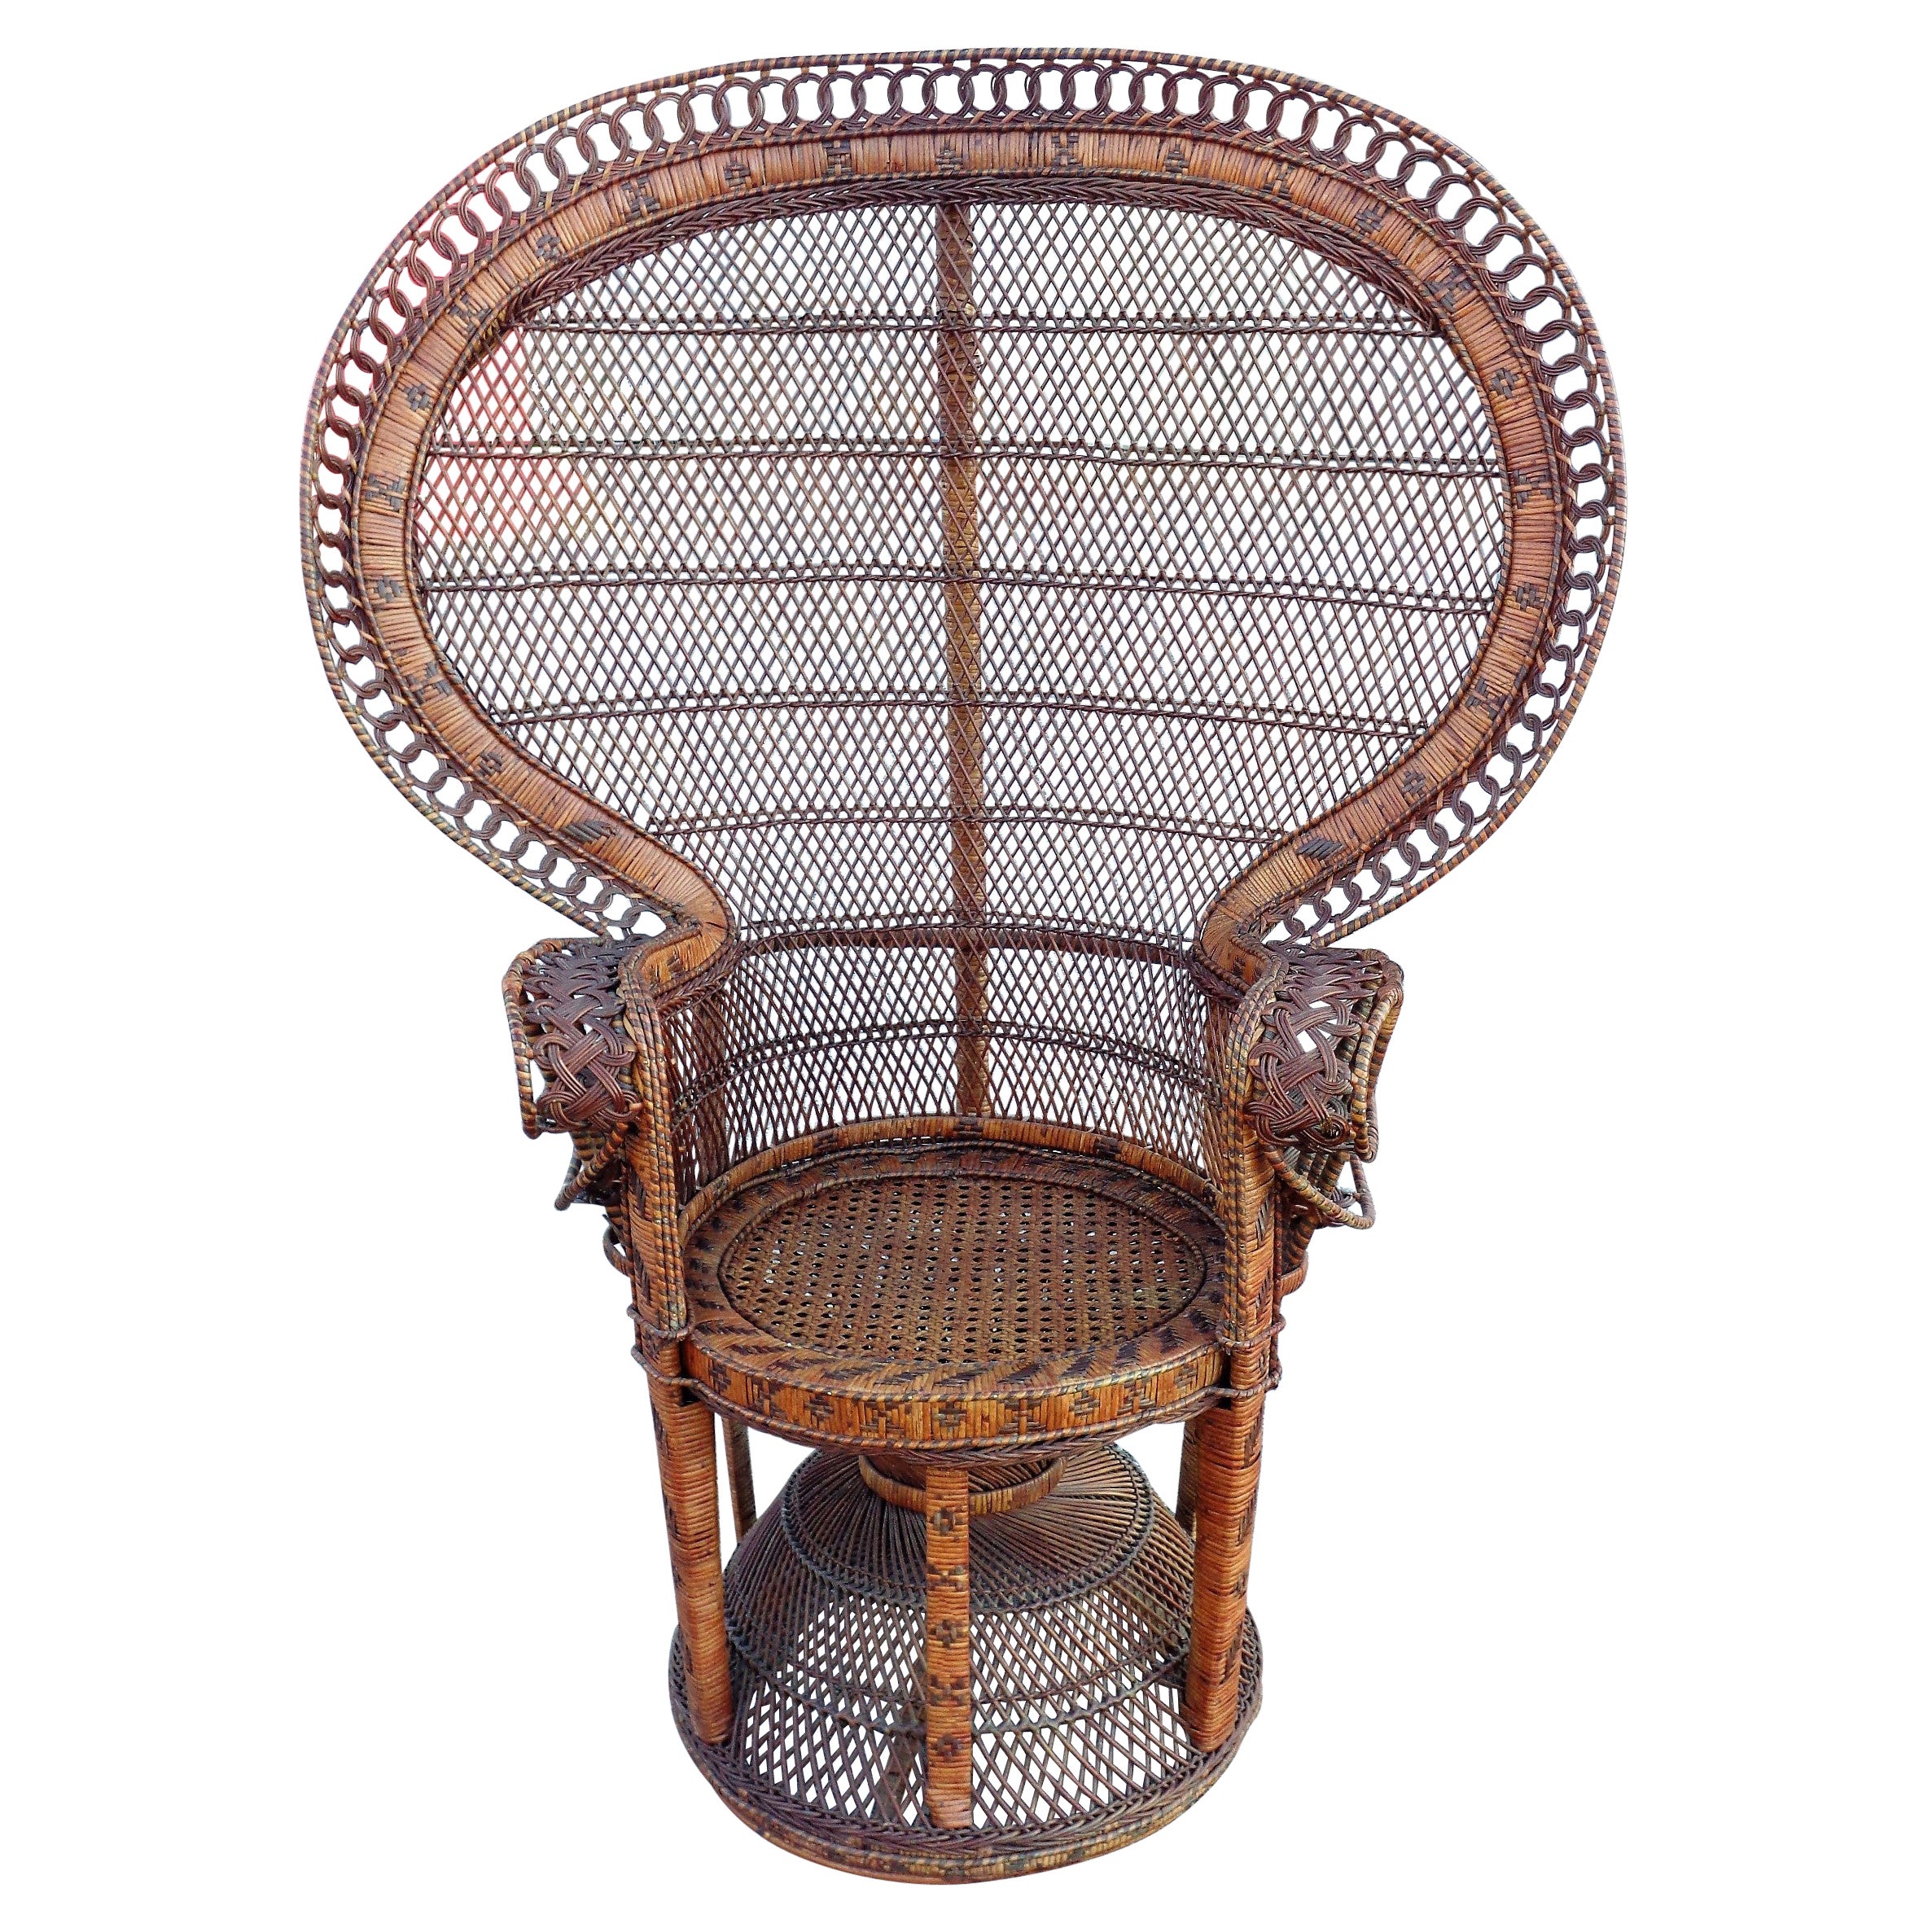 What is a wicker peacock chair?